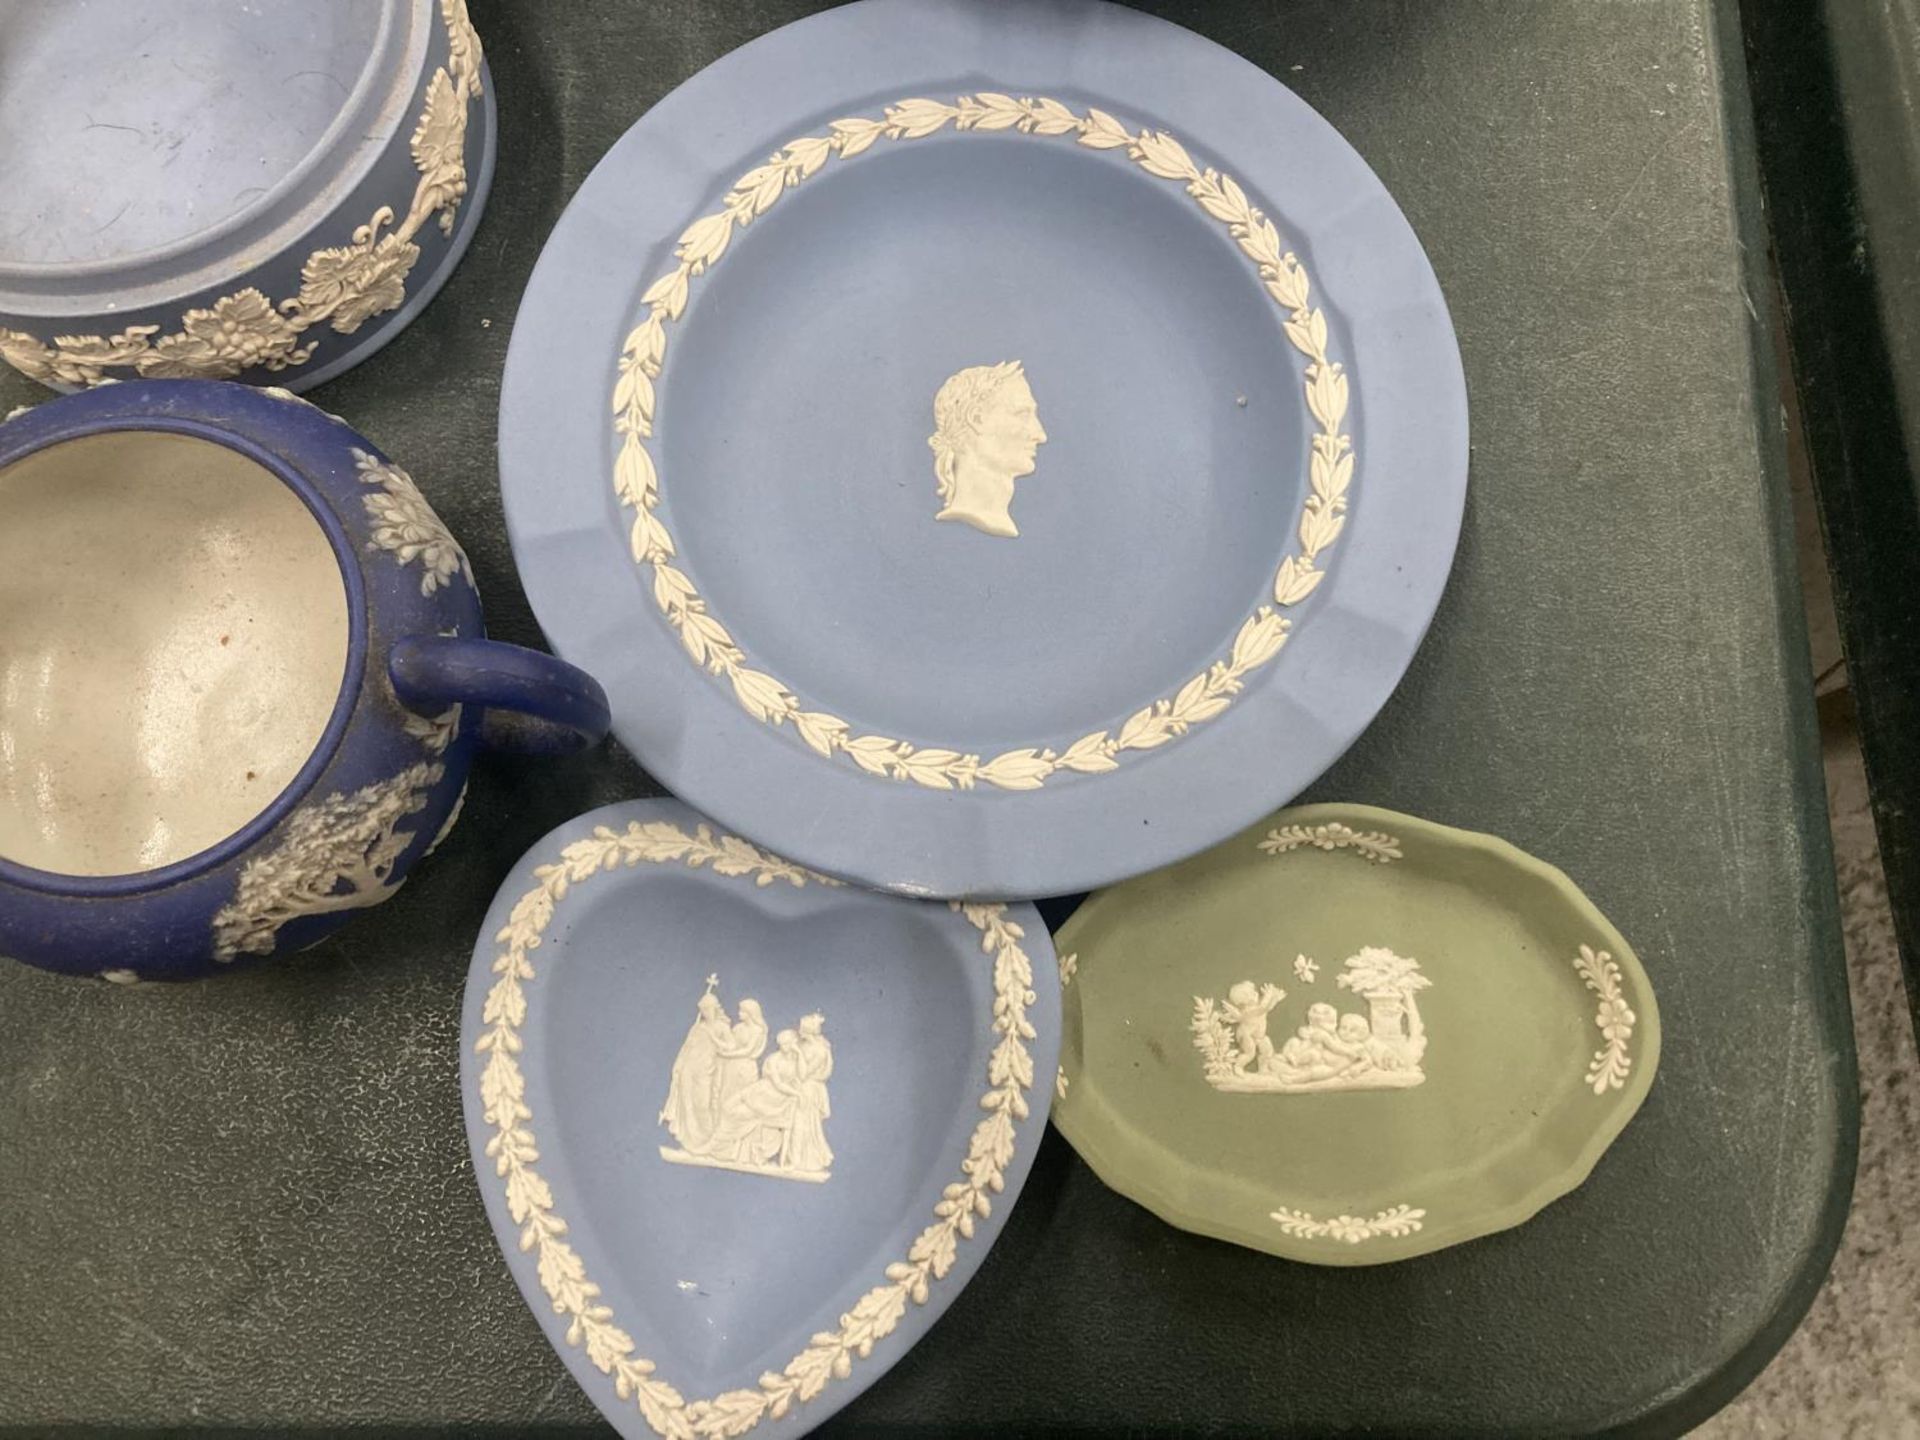 A COLLECTION OF WEDGWOOD JASPERWARE AND QUEEN'S WARE TO INCLUDE A SERVING TUREEN, A SERVING PLATE, - Image 5 of 6